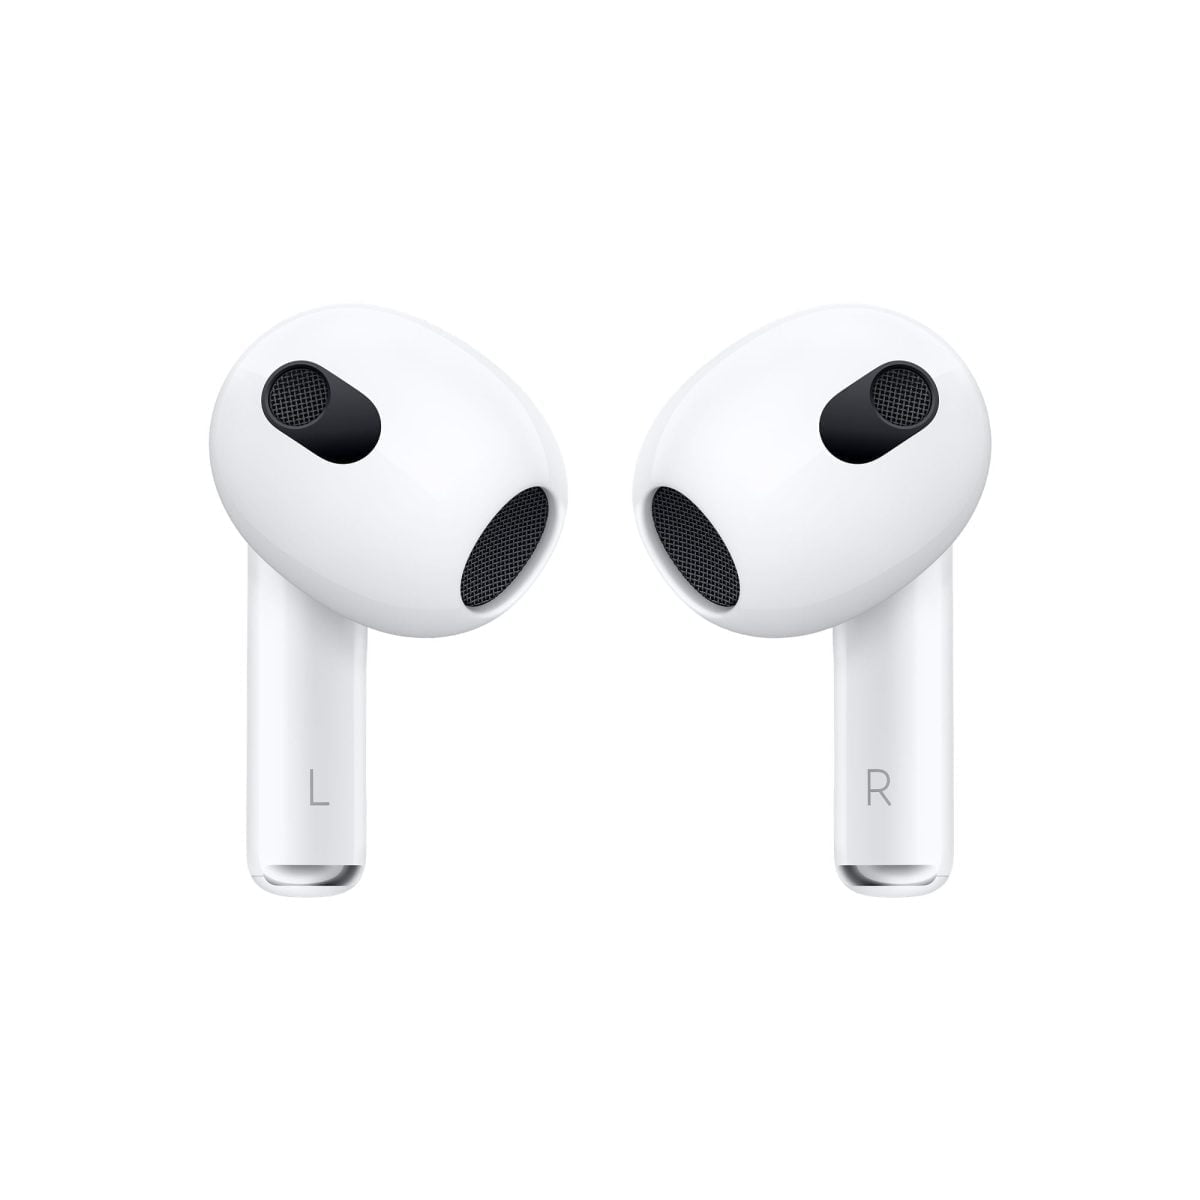 Mme73 Av1 Apple &Lt;H1&Gt;Apple Airpods (3Rd Generation) - White&Lt;/H1&Gt; &Lt;Div Class=&Quot;Rc-Pdsection-Mainpanel Column Large-9 Small-12&Quot;&Gt; &Lt;H2 Class=&Quot;H4-Para-Title&Quot;&Gt;All-New Design&Lt;/H2&Gt; &Lt;Div Class=&Quot;Para-List As-Pdp-Lastparalist&Quot;&Gt; Airpods Are Lightweight And Offer A Contoured Design. They Sit At Just The Right Angle For Comfort And To Better Direct Audio To Your Ear. The Stem Is 33 Percent Shorter Than Airpods (2Nd Generation) And Includes A Force Sensor To Easily Control Music And Calls. &Lt;/Div&Gt; &Lt;/Div&Gt; Apple Airpods Apple Airpods (3Rd Generation) - White (Mme73)